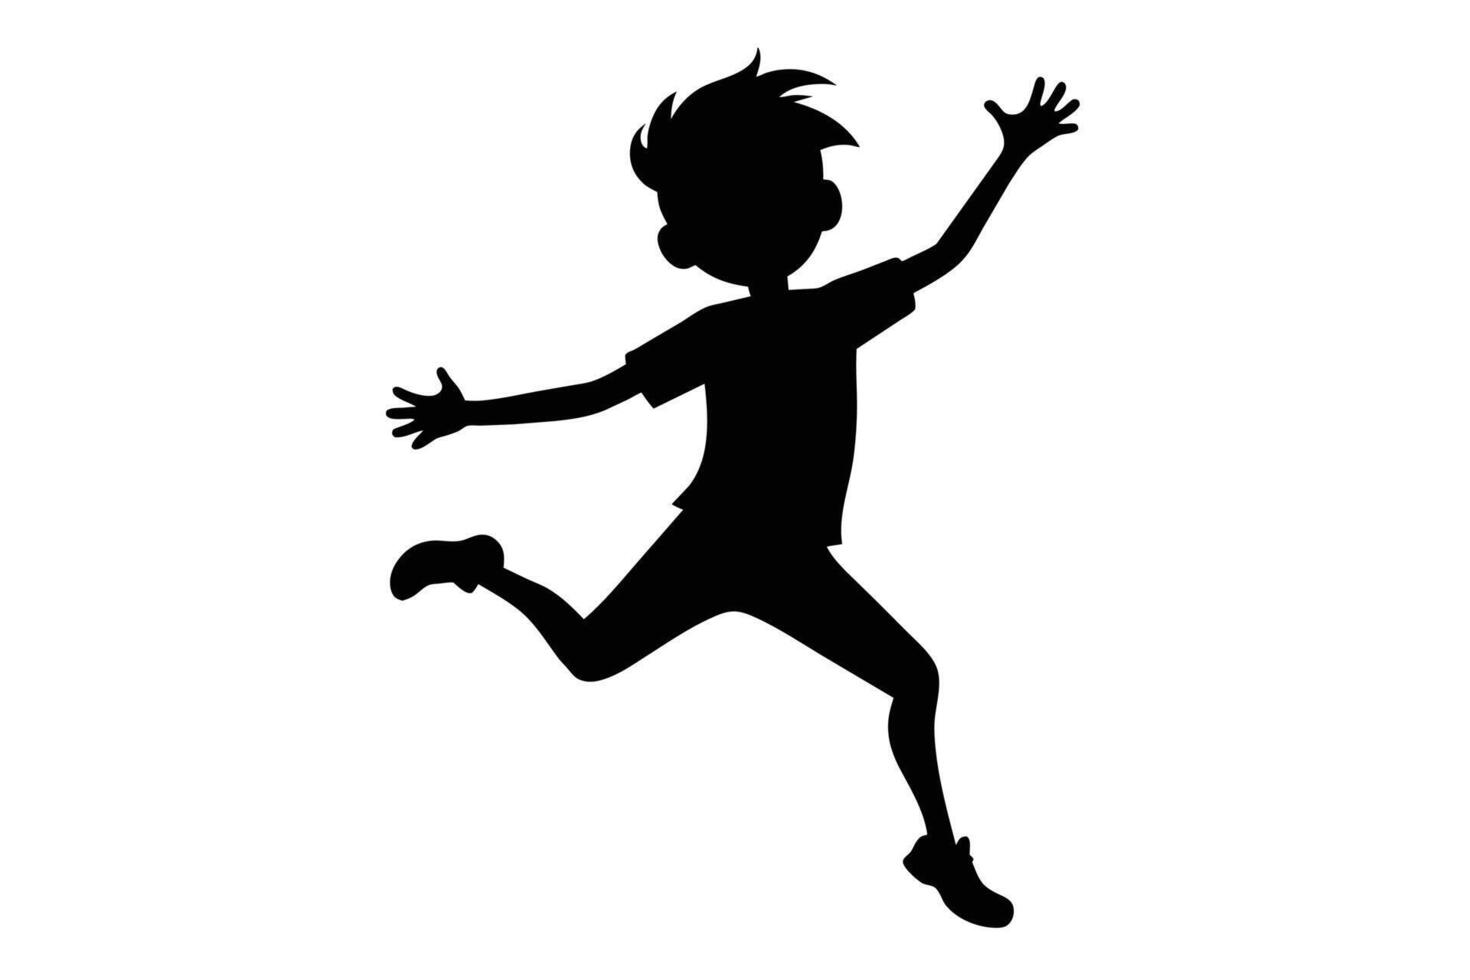 Jumping kid black icon on white background. Jumping kid silhouette vector